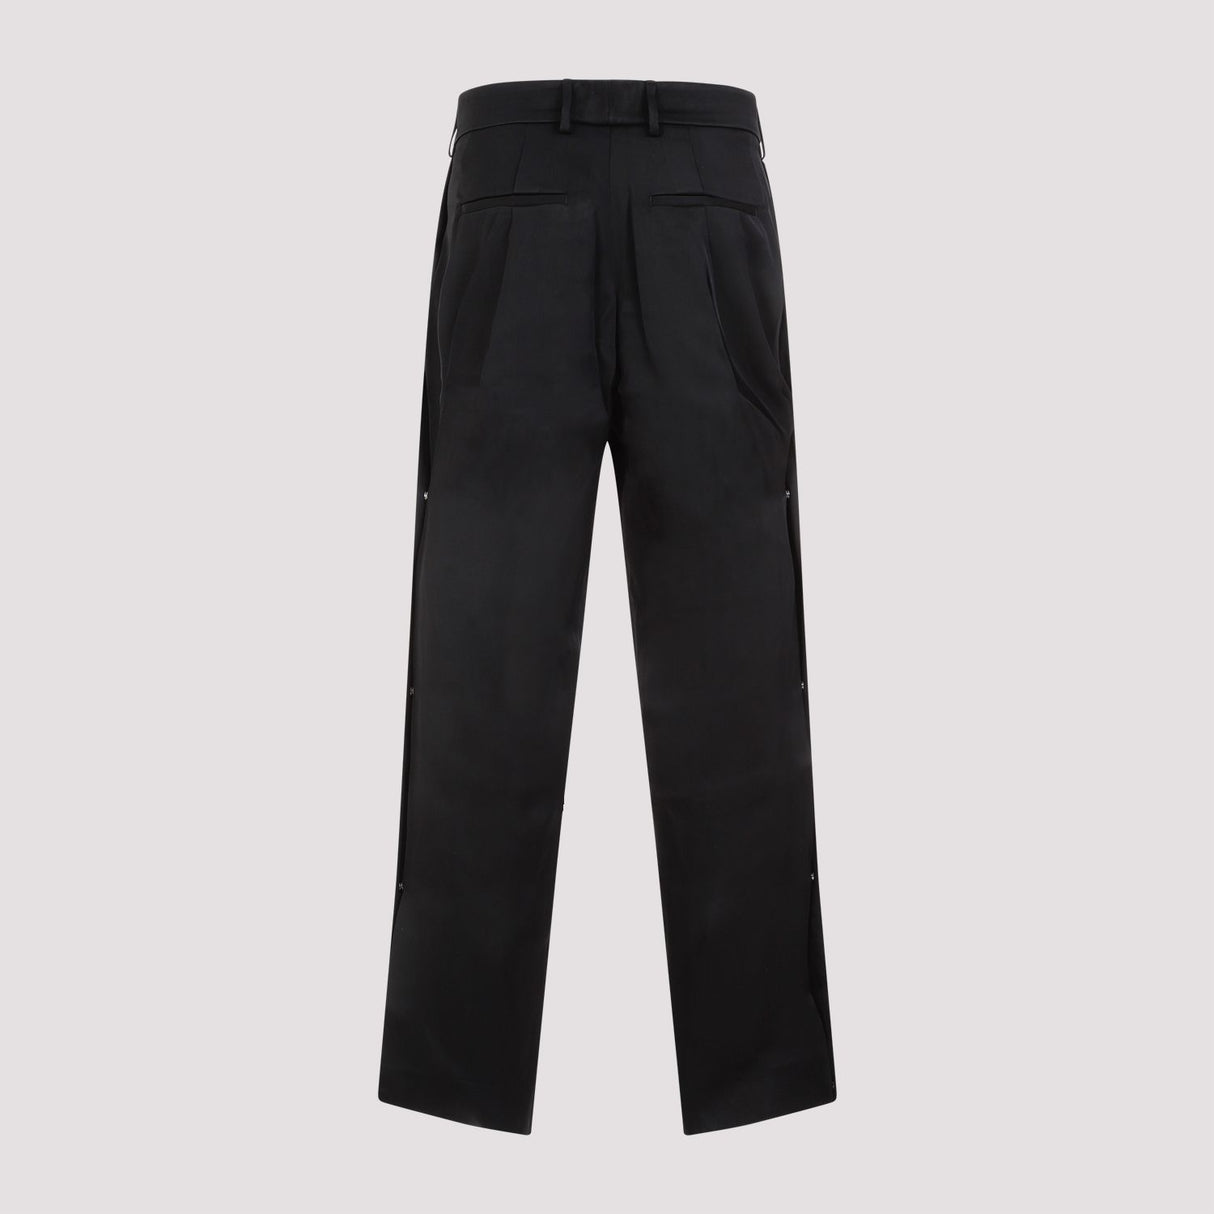 AMIRI Black Pleated Snap Pants for Men - FW23 Collection